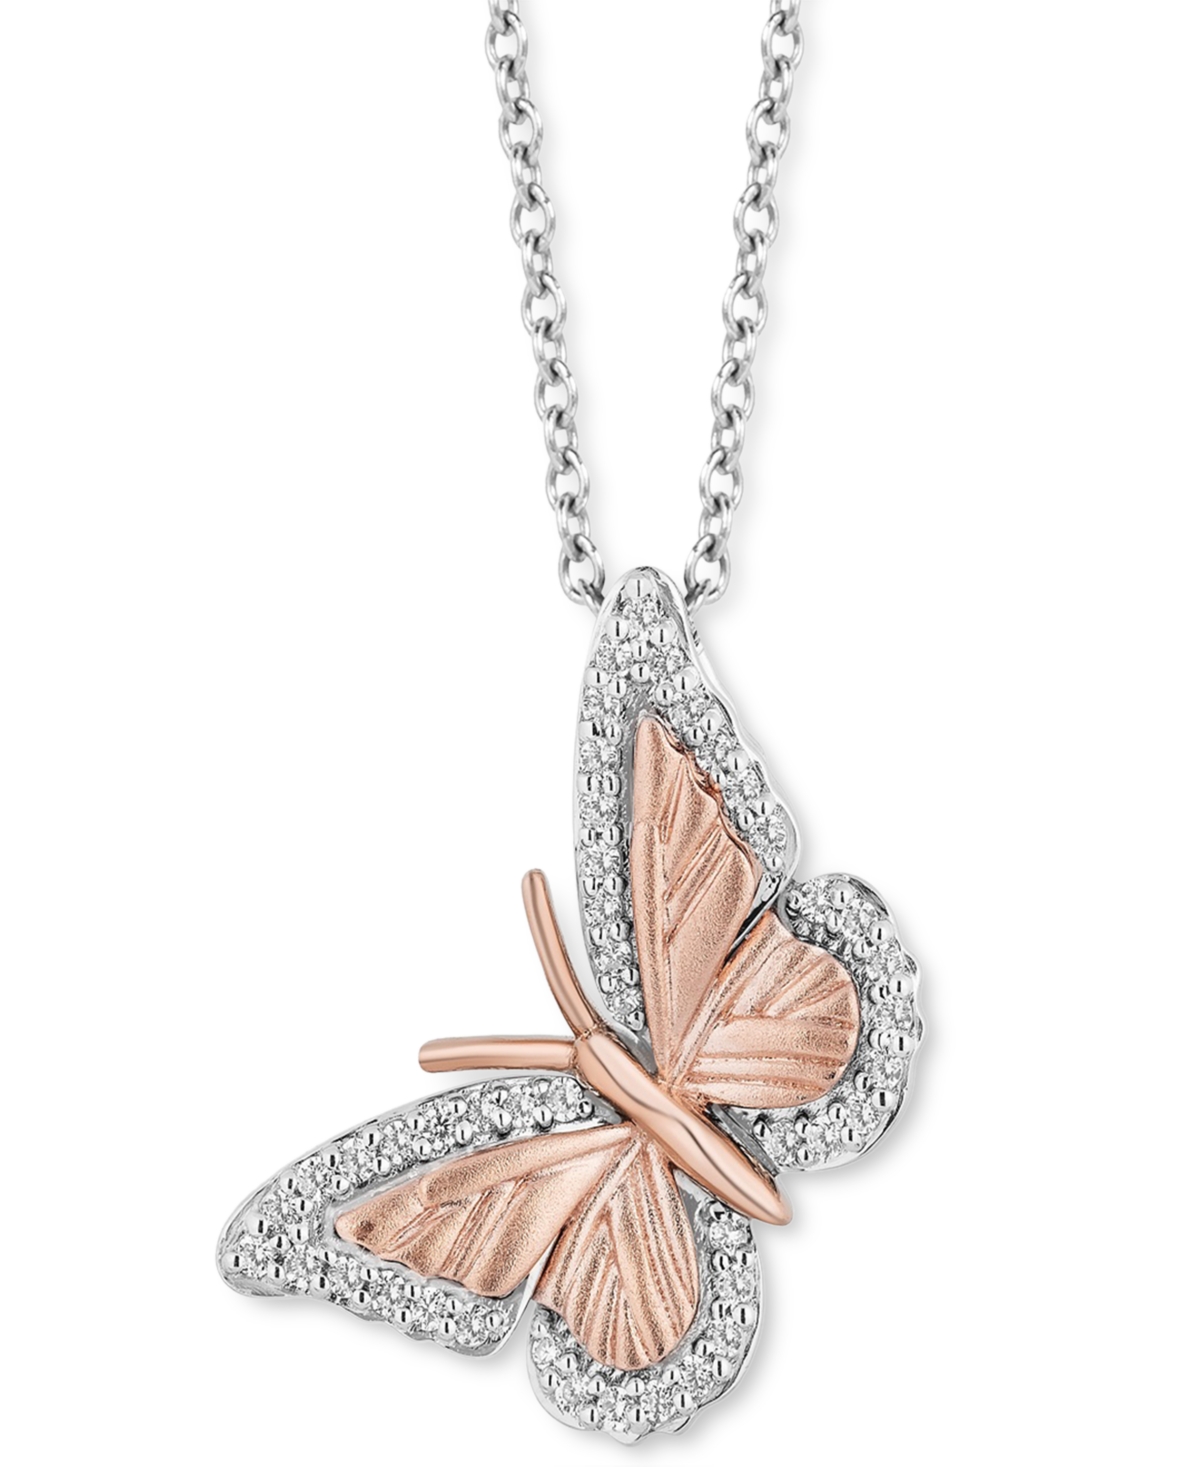 Diamond Butterfly Pendant Necklace (1/7 ct. t.w.) in Sterling Silver & 14k Rose Gold, 16" + 2" extender - Rose Gold/ Ste